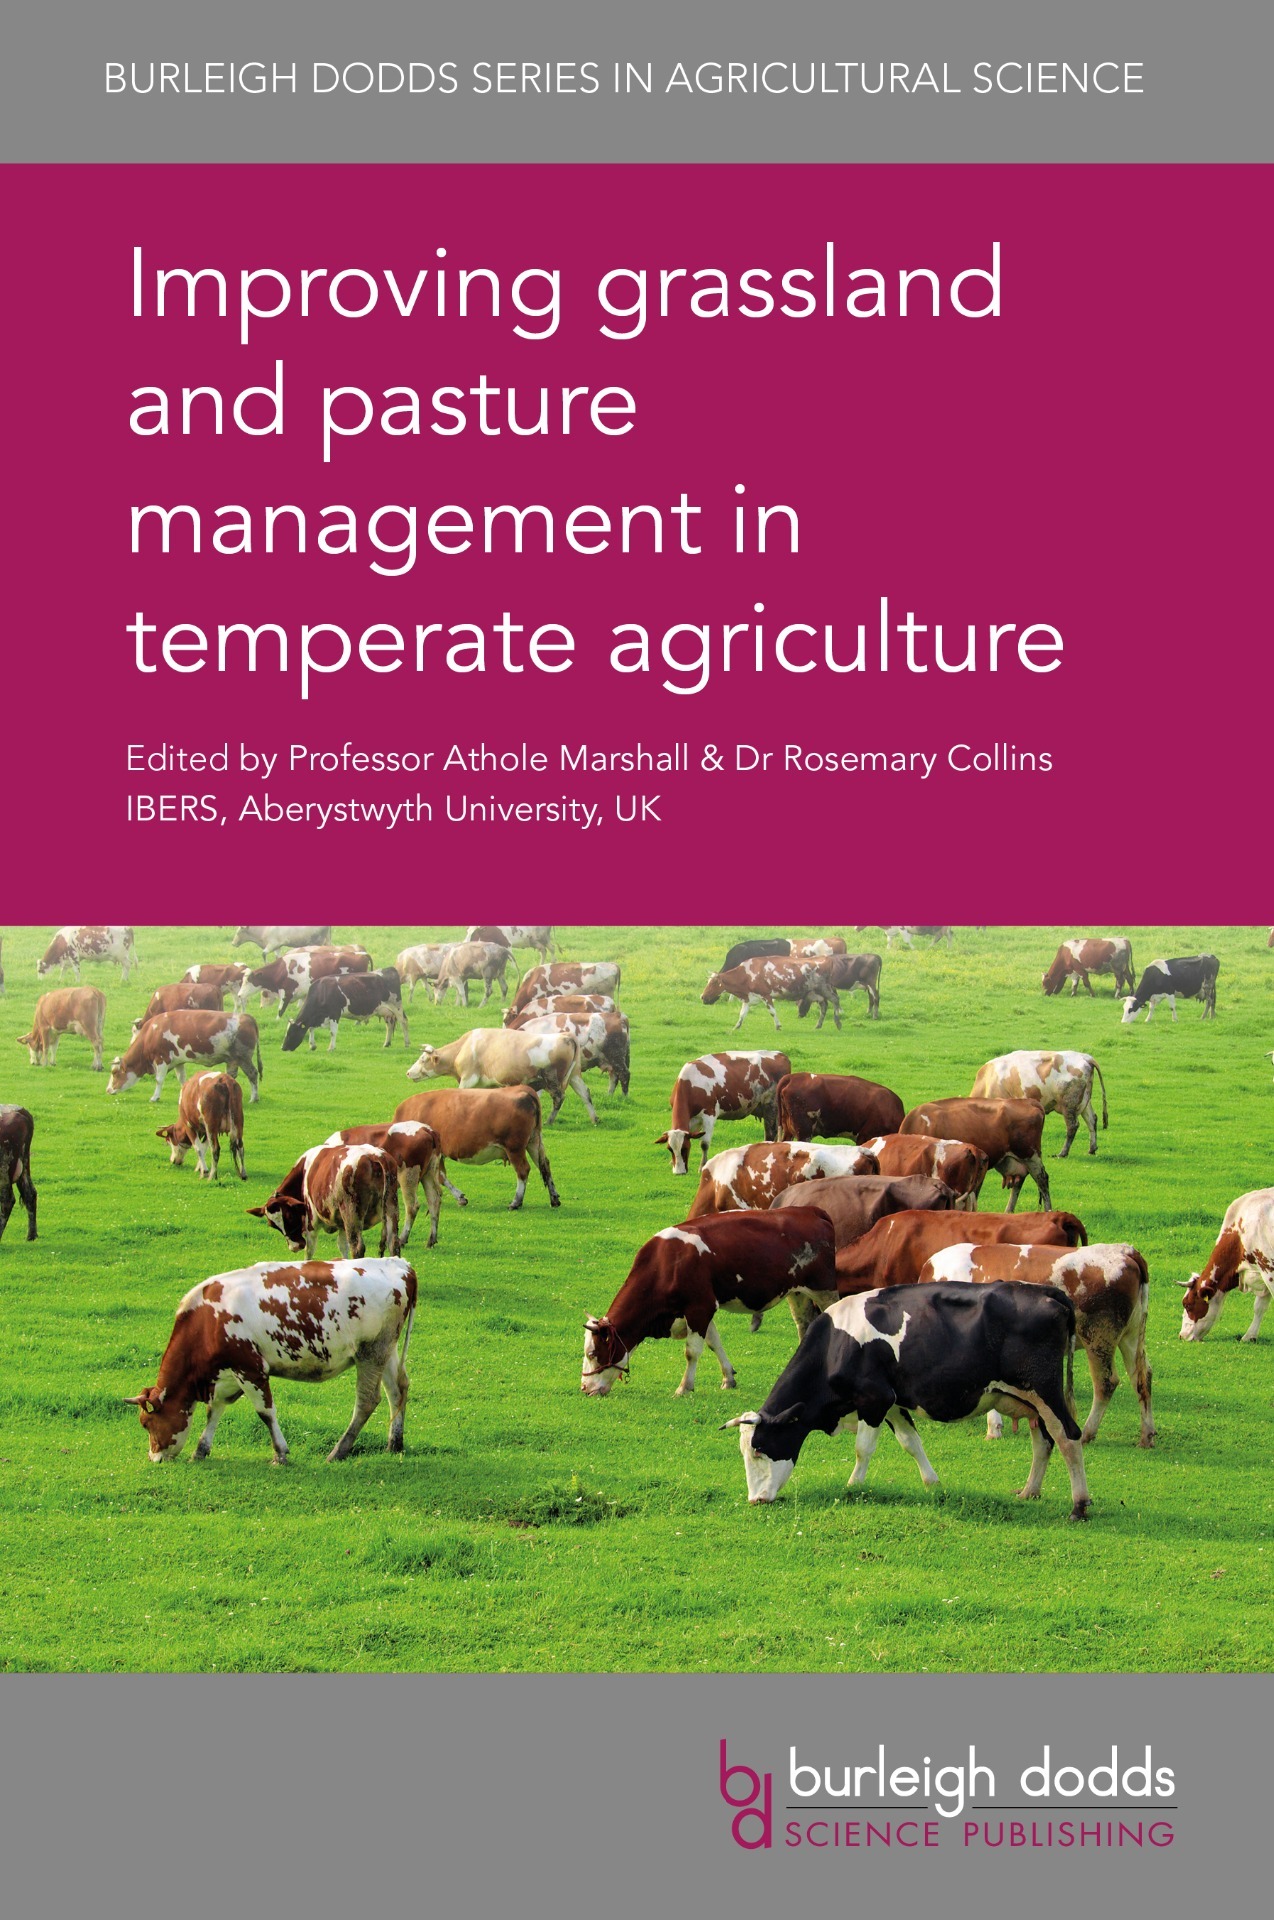 Improving grassland and pasture management in temperate agriculture